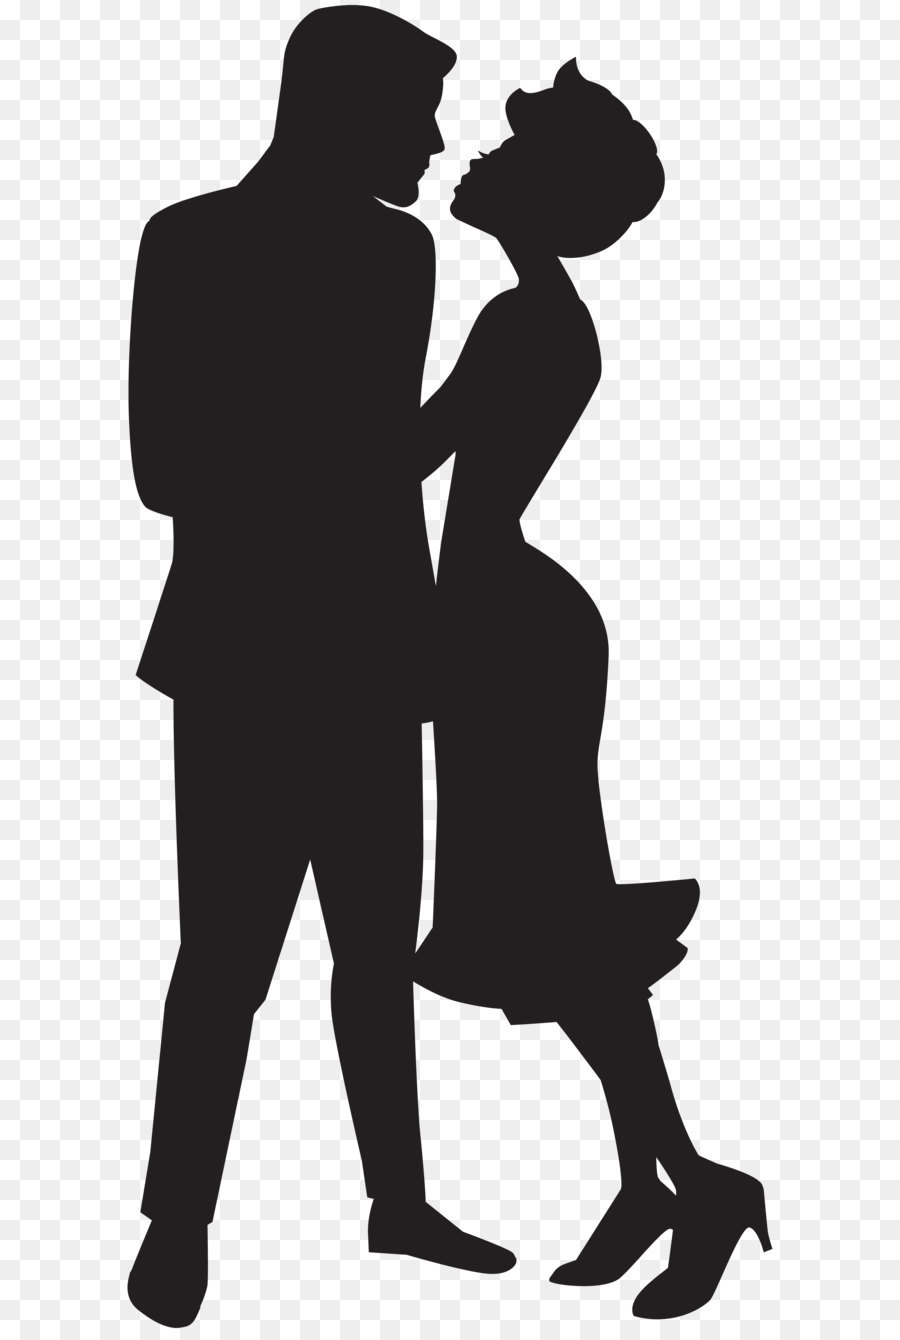 Free Couple In Love Silhouette, Download Free Couple In Love Silhouette ...